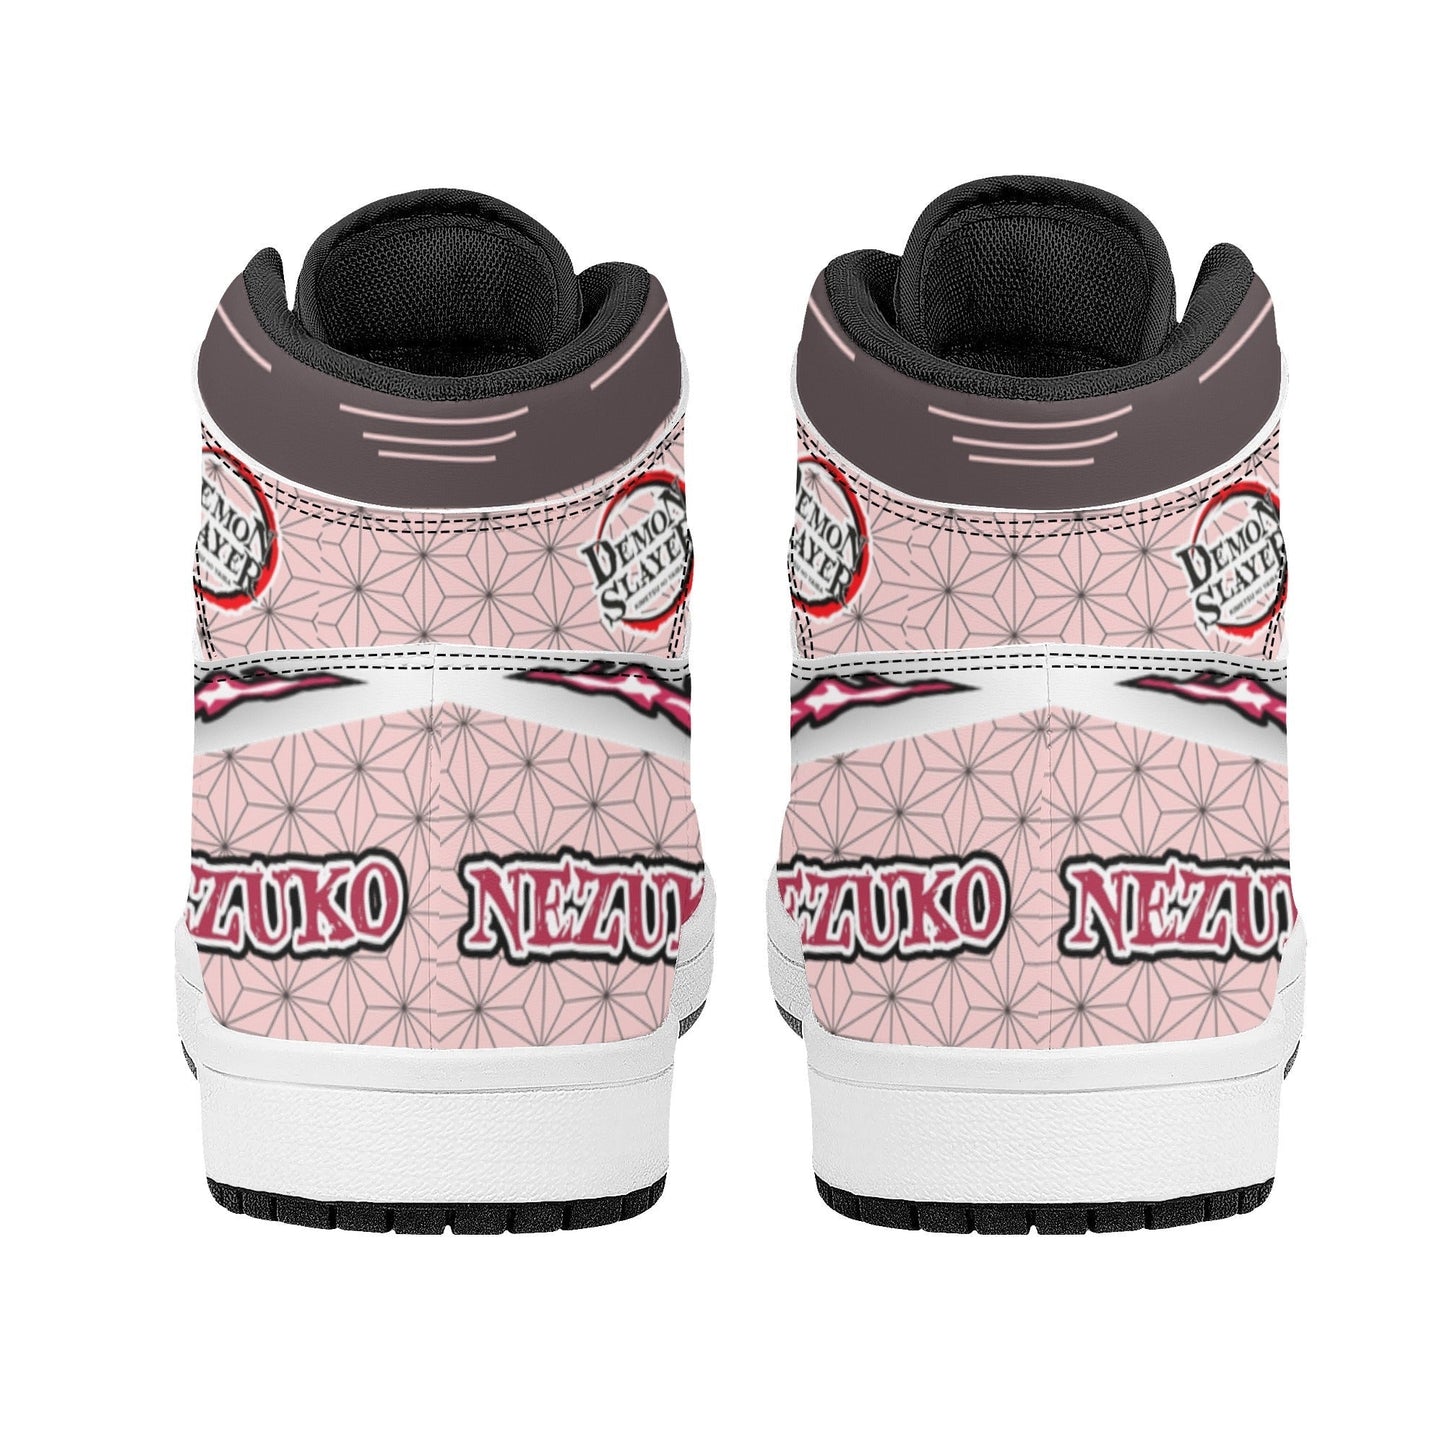 Kamado Nezuko comfortable casual sports shoes（Size is American size, other countries please contact customer service）